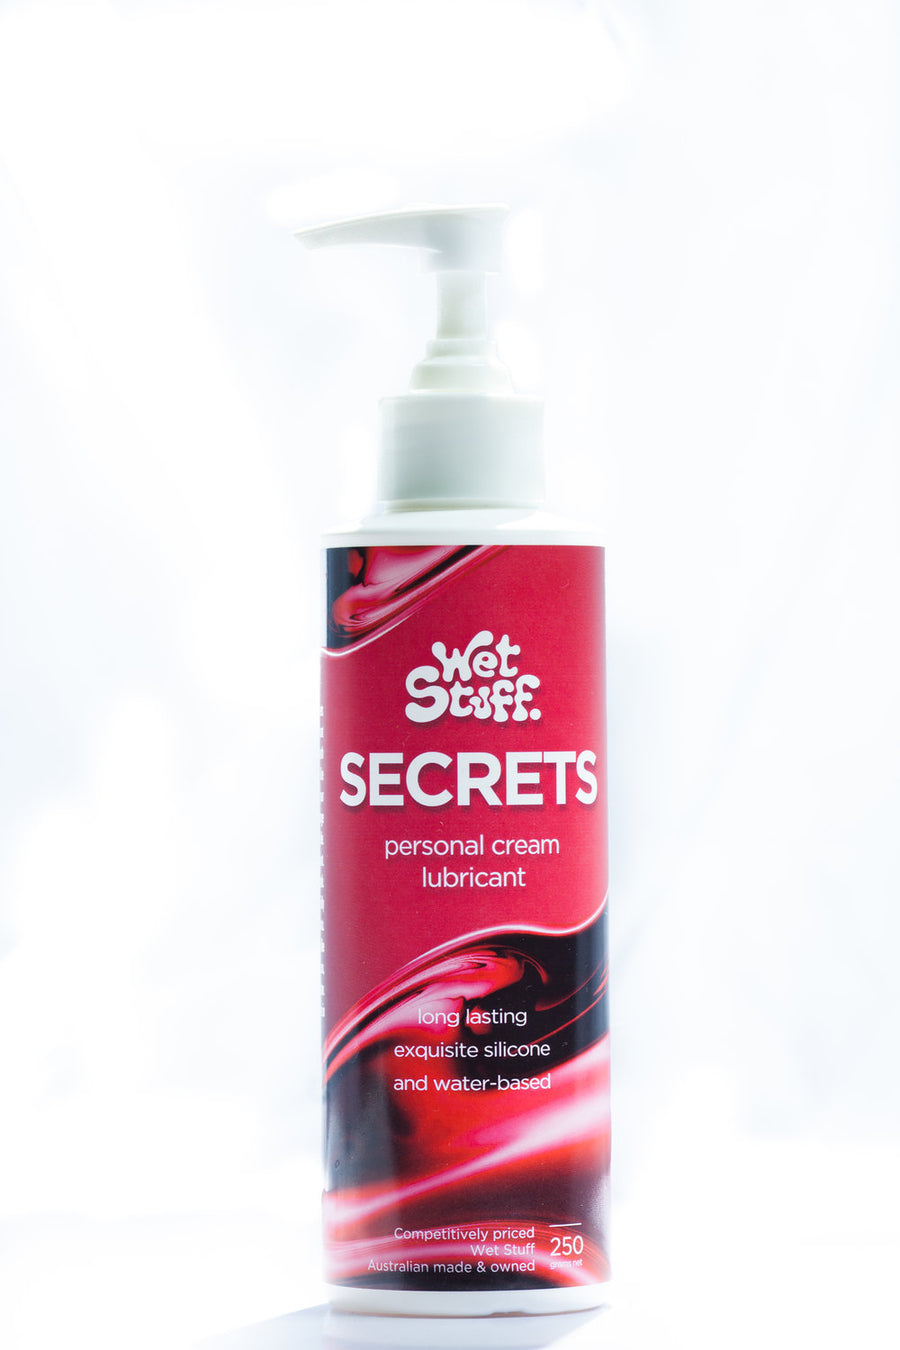 Wet Stuff Secrets Long Lasting Exquisite Silicone and Water Based Lubricant 250g Personal Cream Lubricant